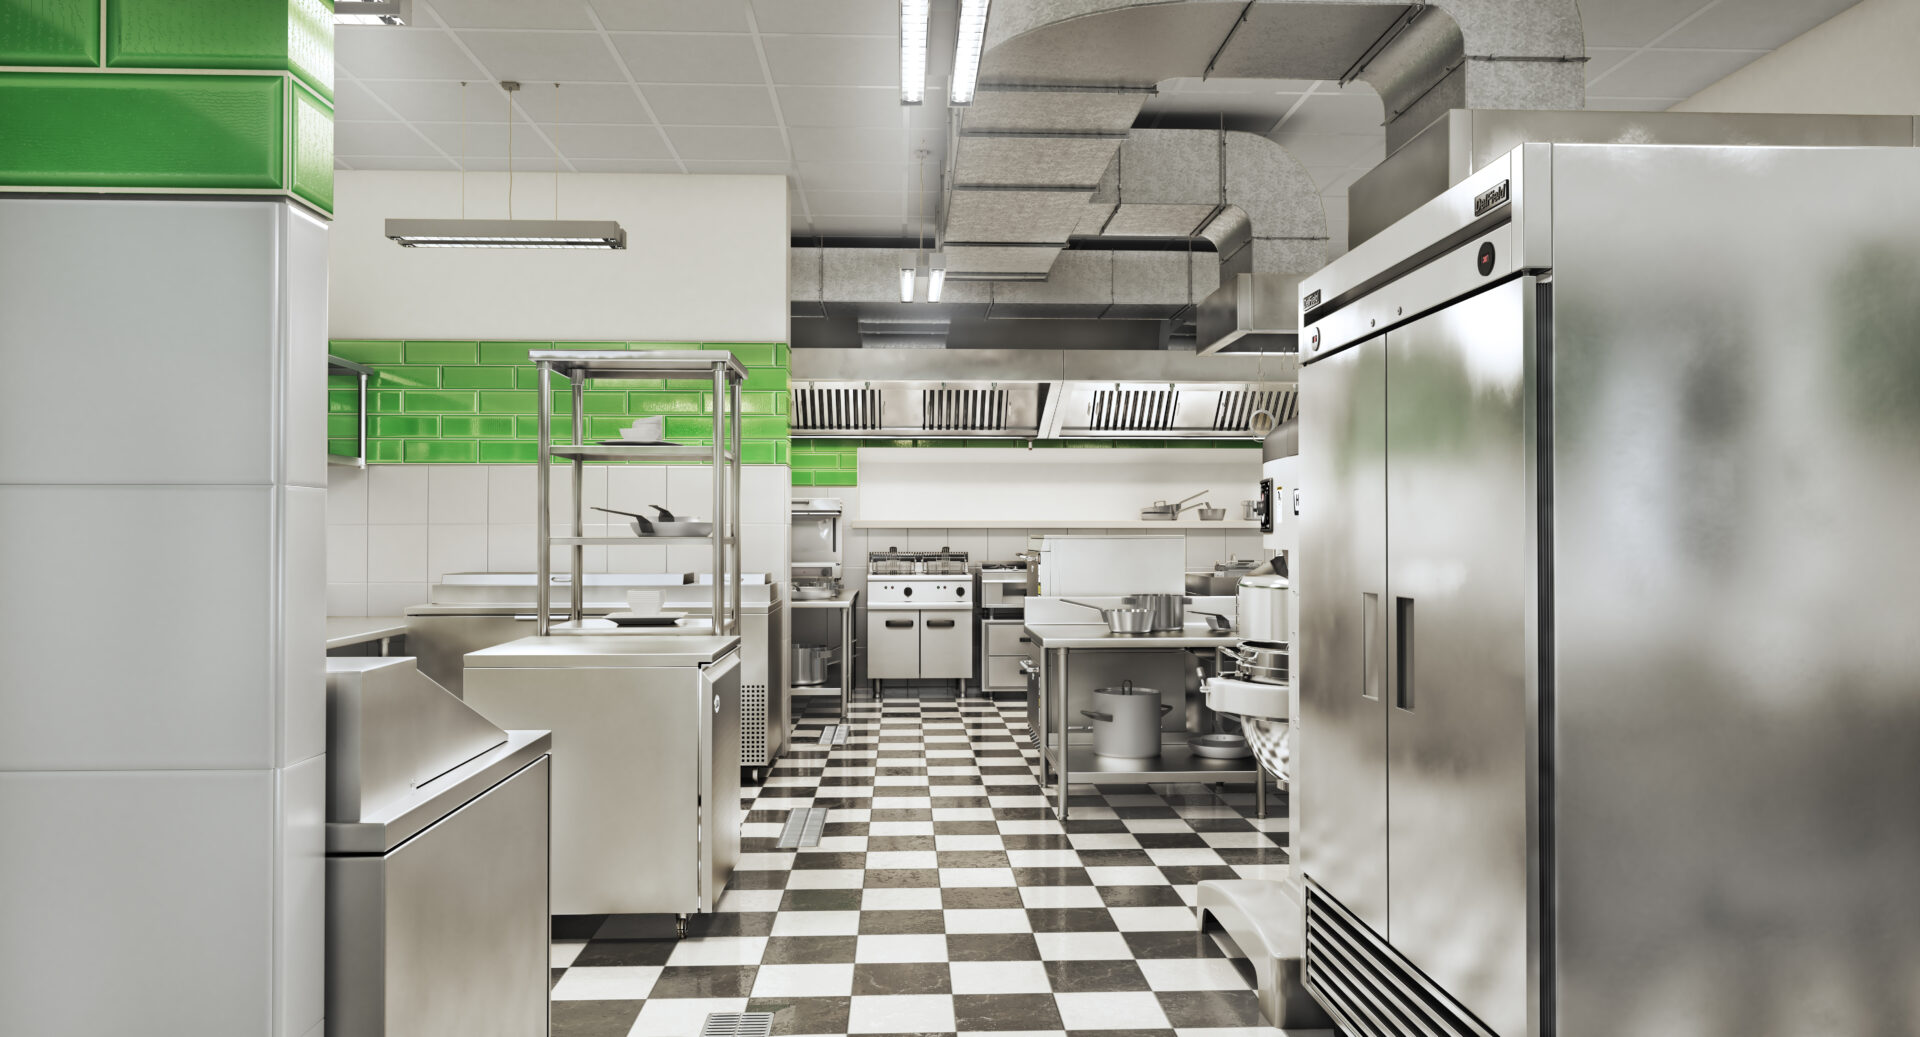 A kitchen with black and white checkered floor